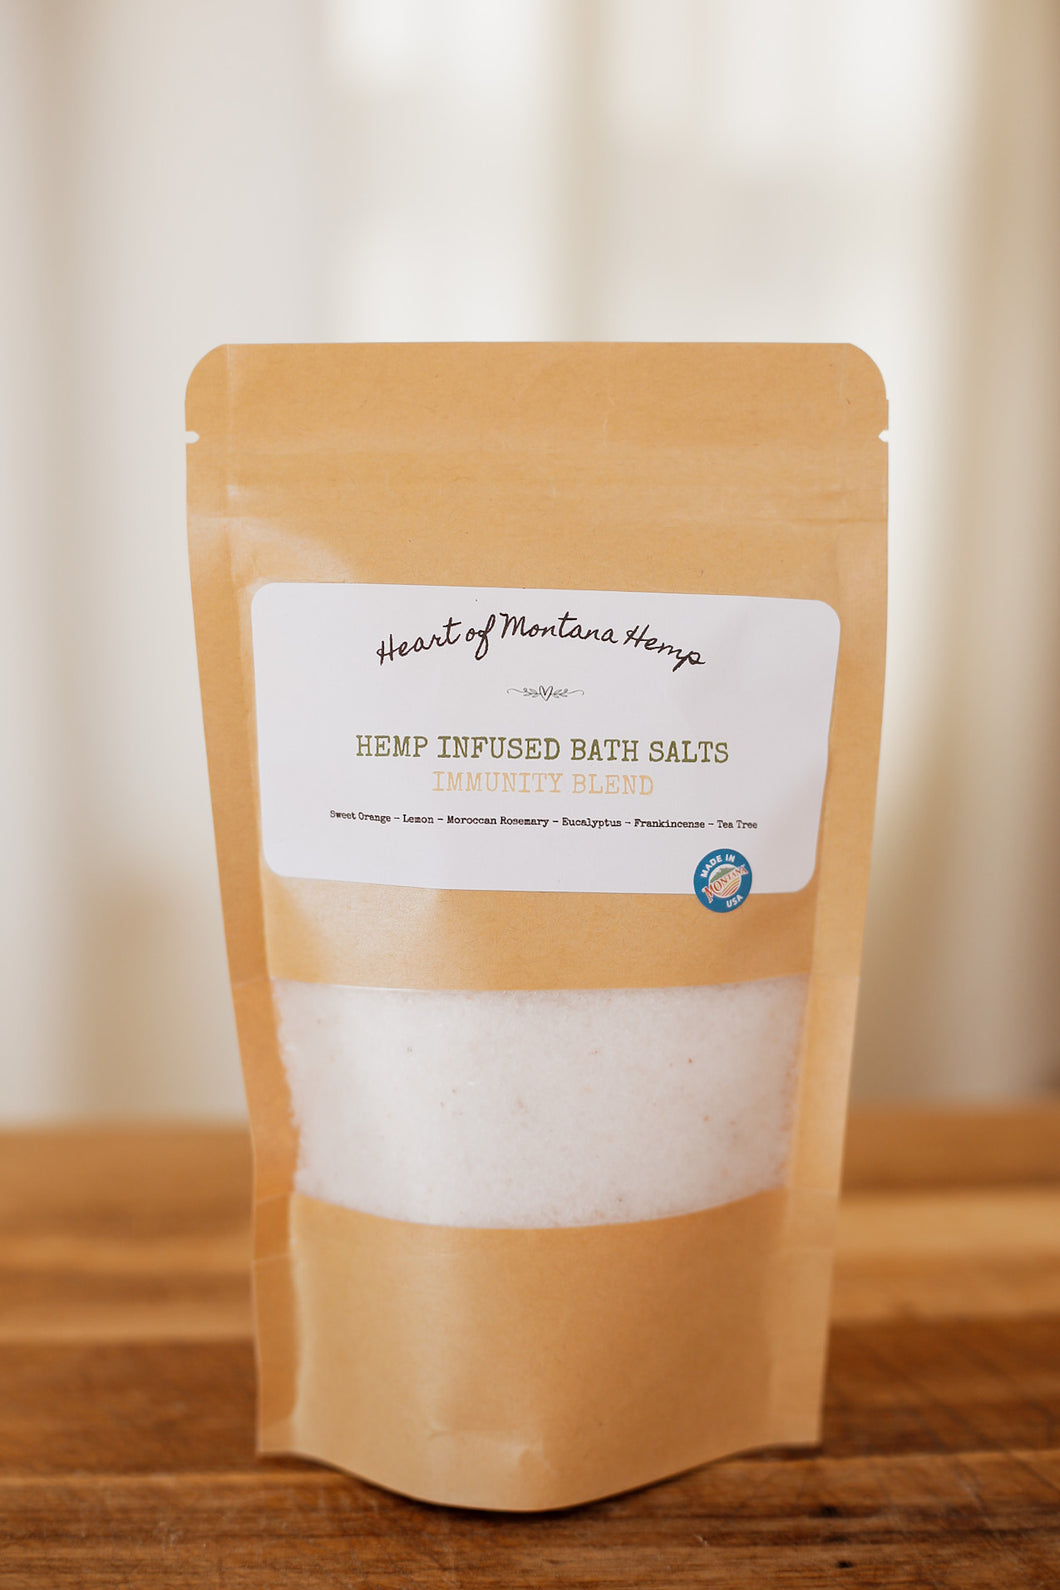 Immunity Blend- Hemp Infused Bath Salts - Ultimate recovery and aid in colds, flu's and overall health. Relax & Recover